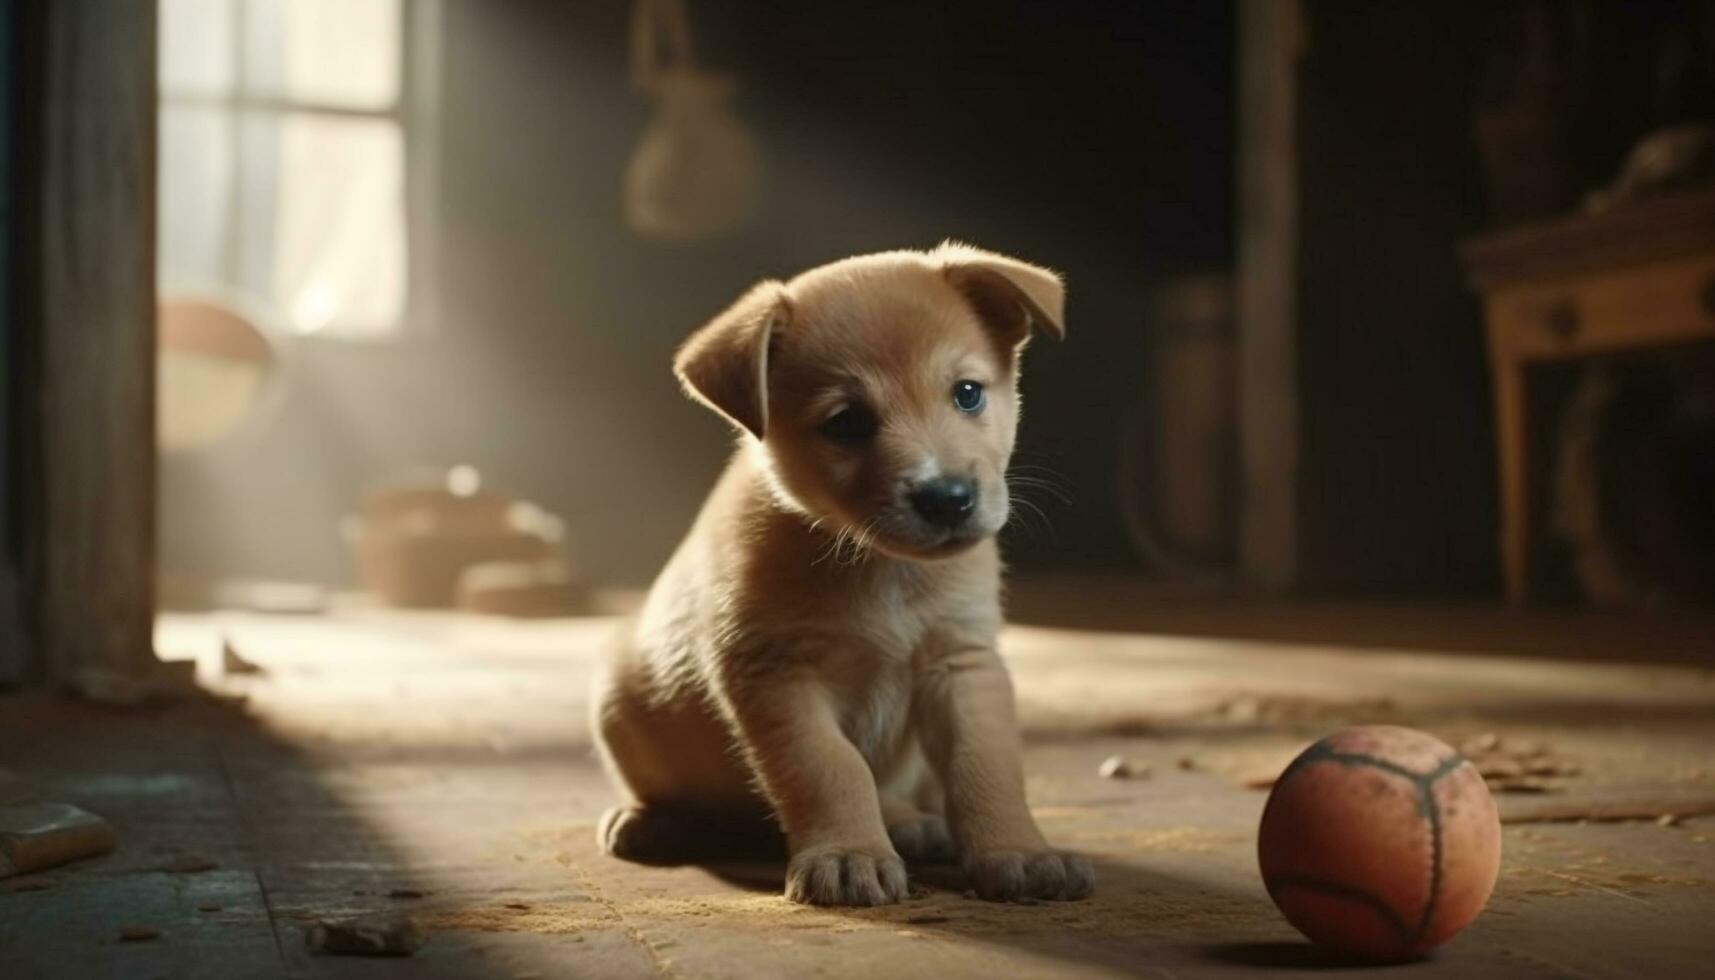 Cute small puppy playing with toy, looking at camera indoors generated by AI photo